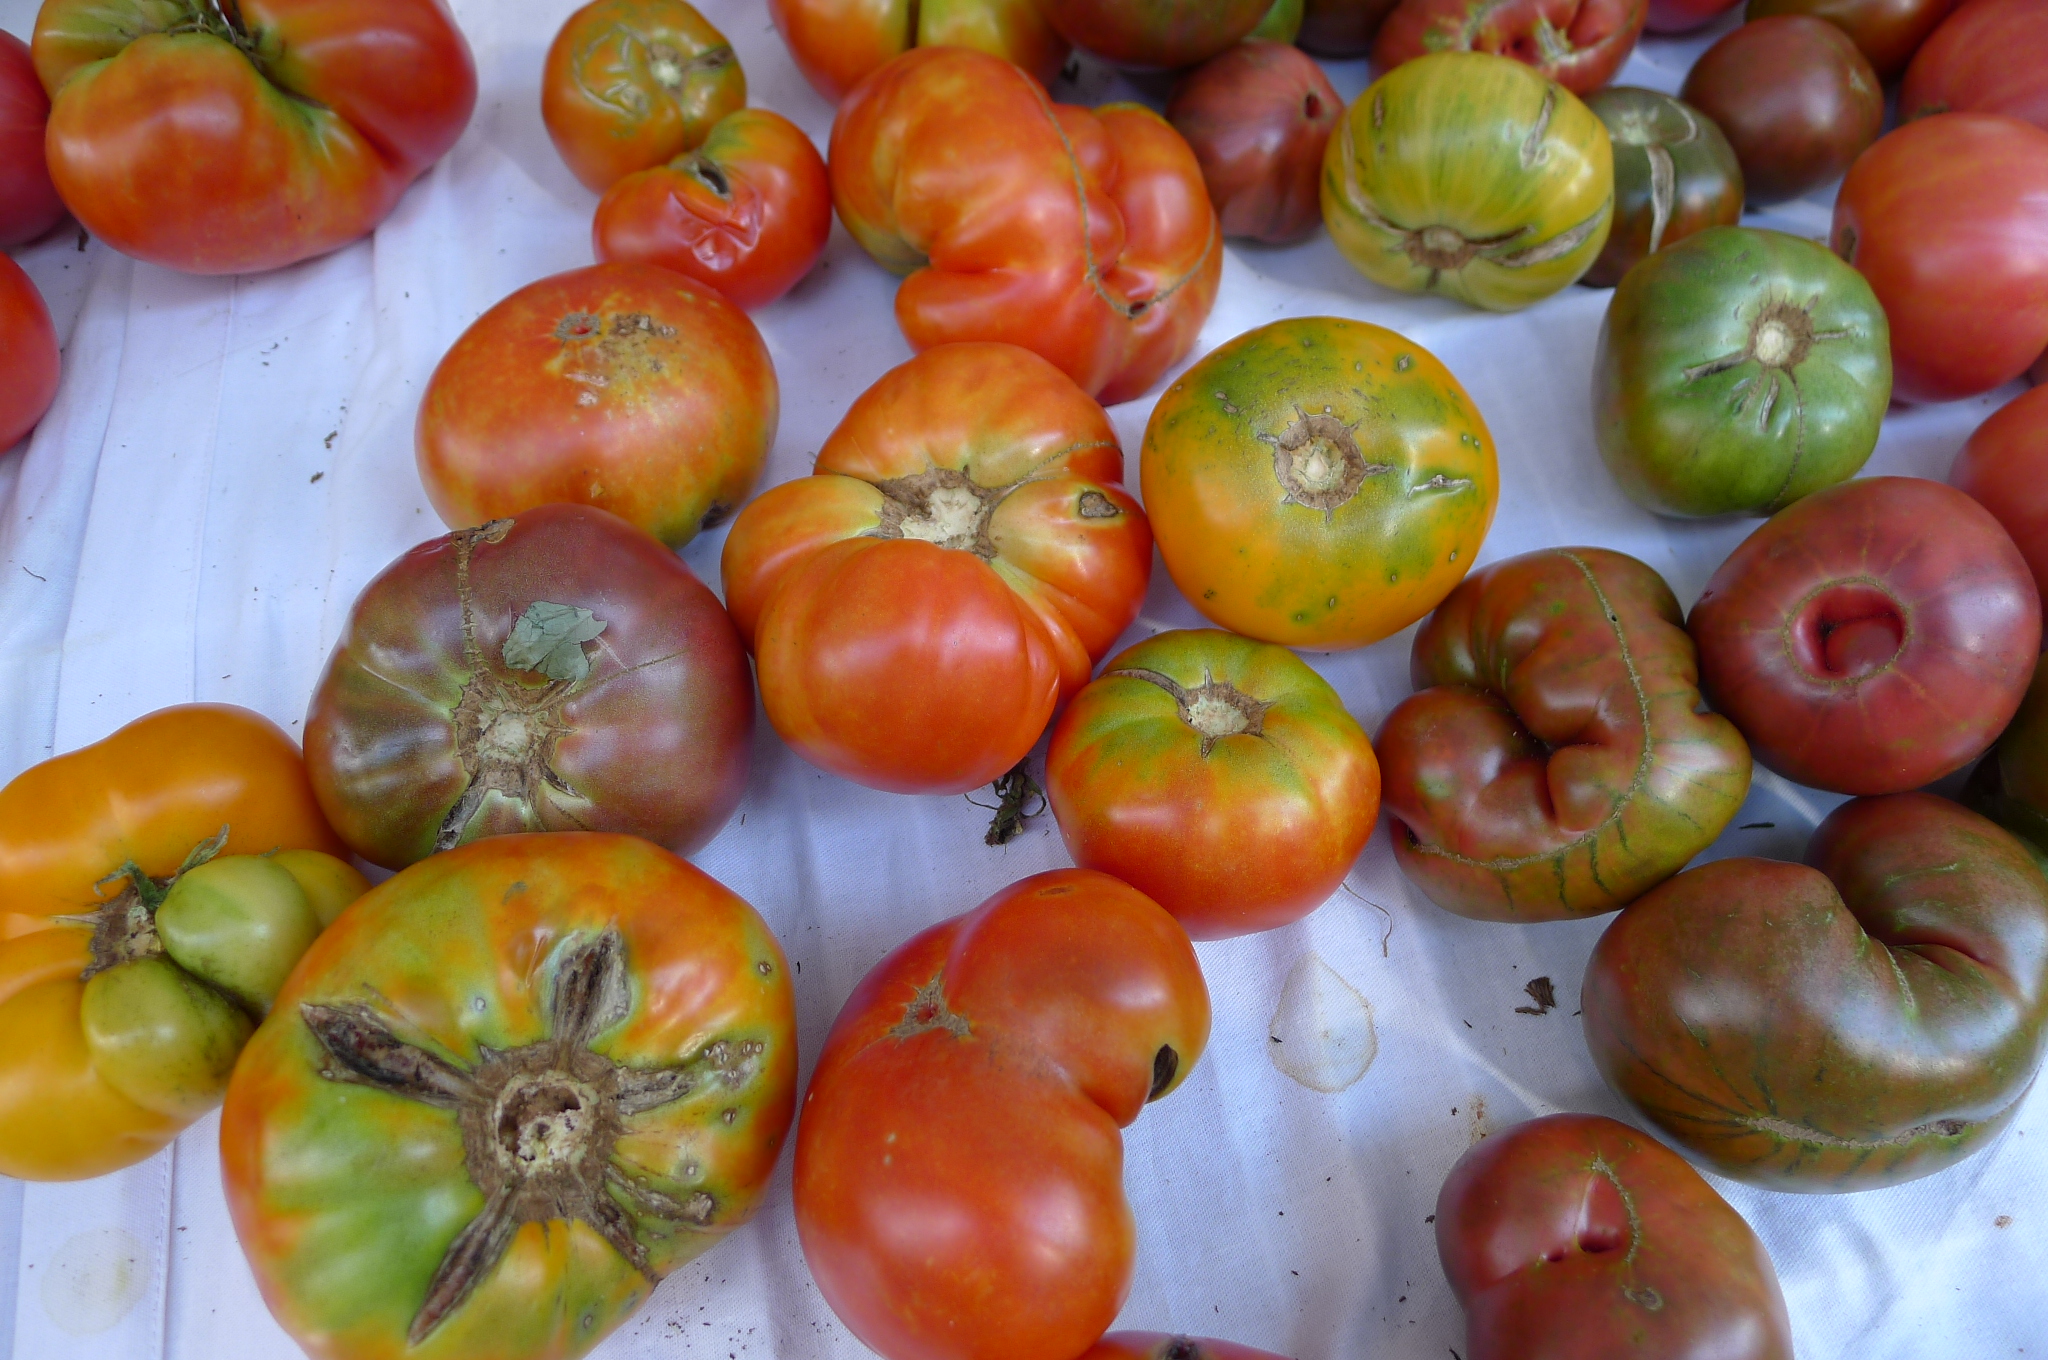 Irregular scarred tomatoes in a variety of pleasing colors.